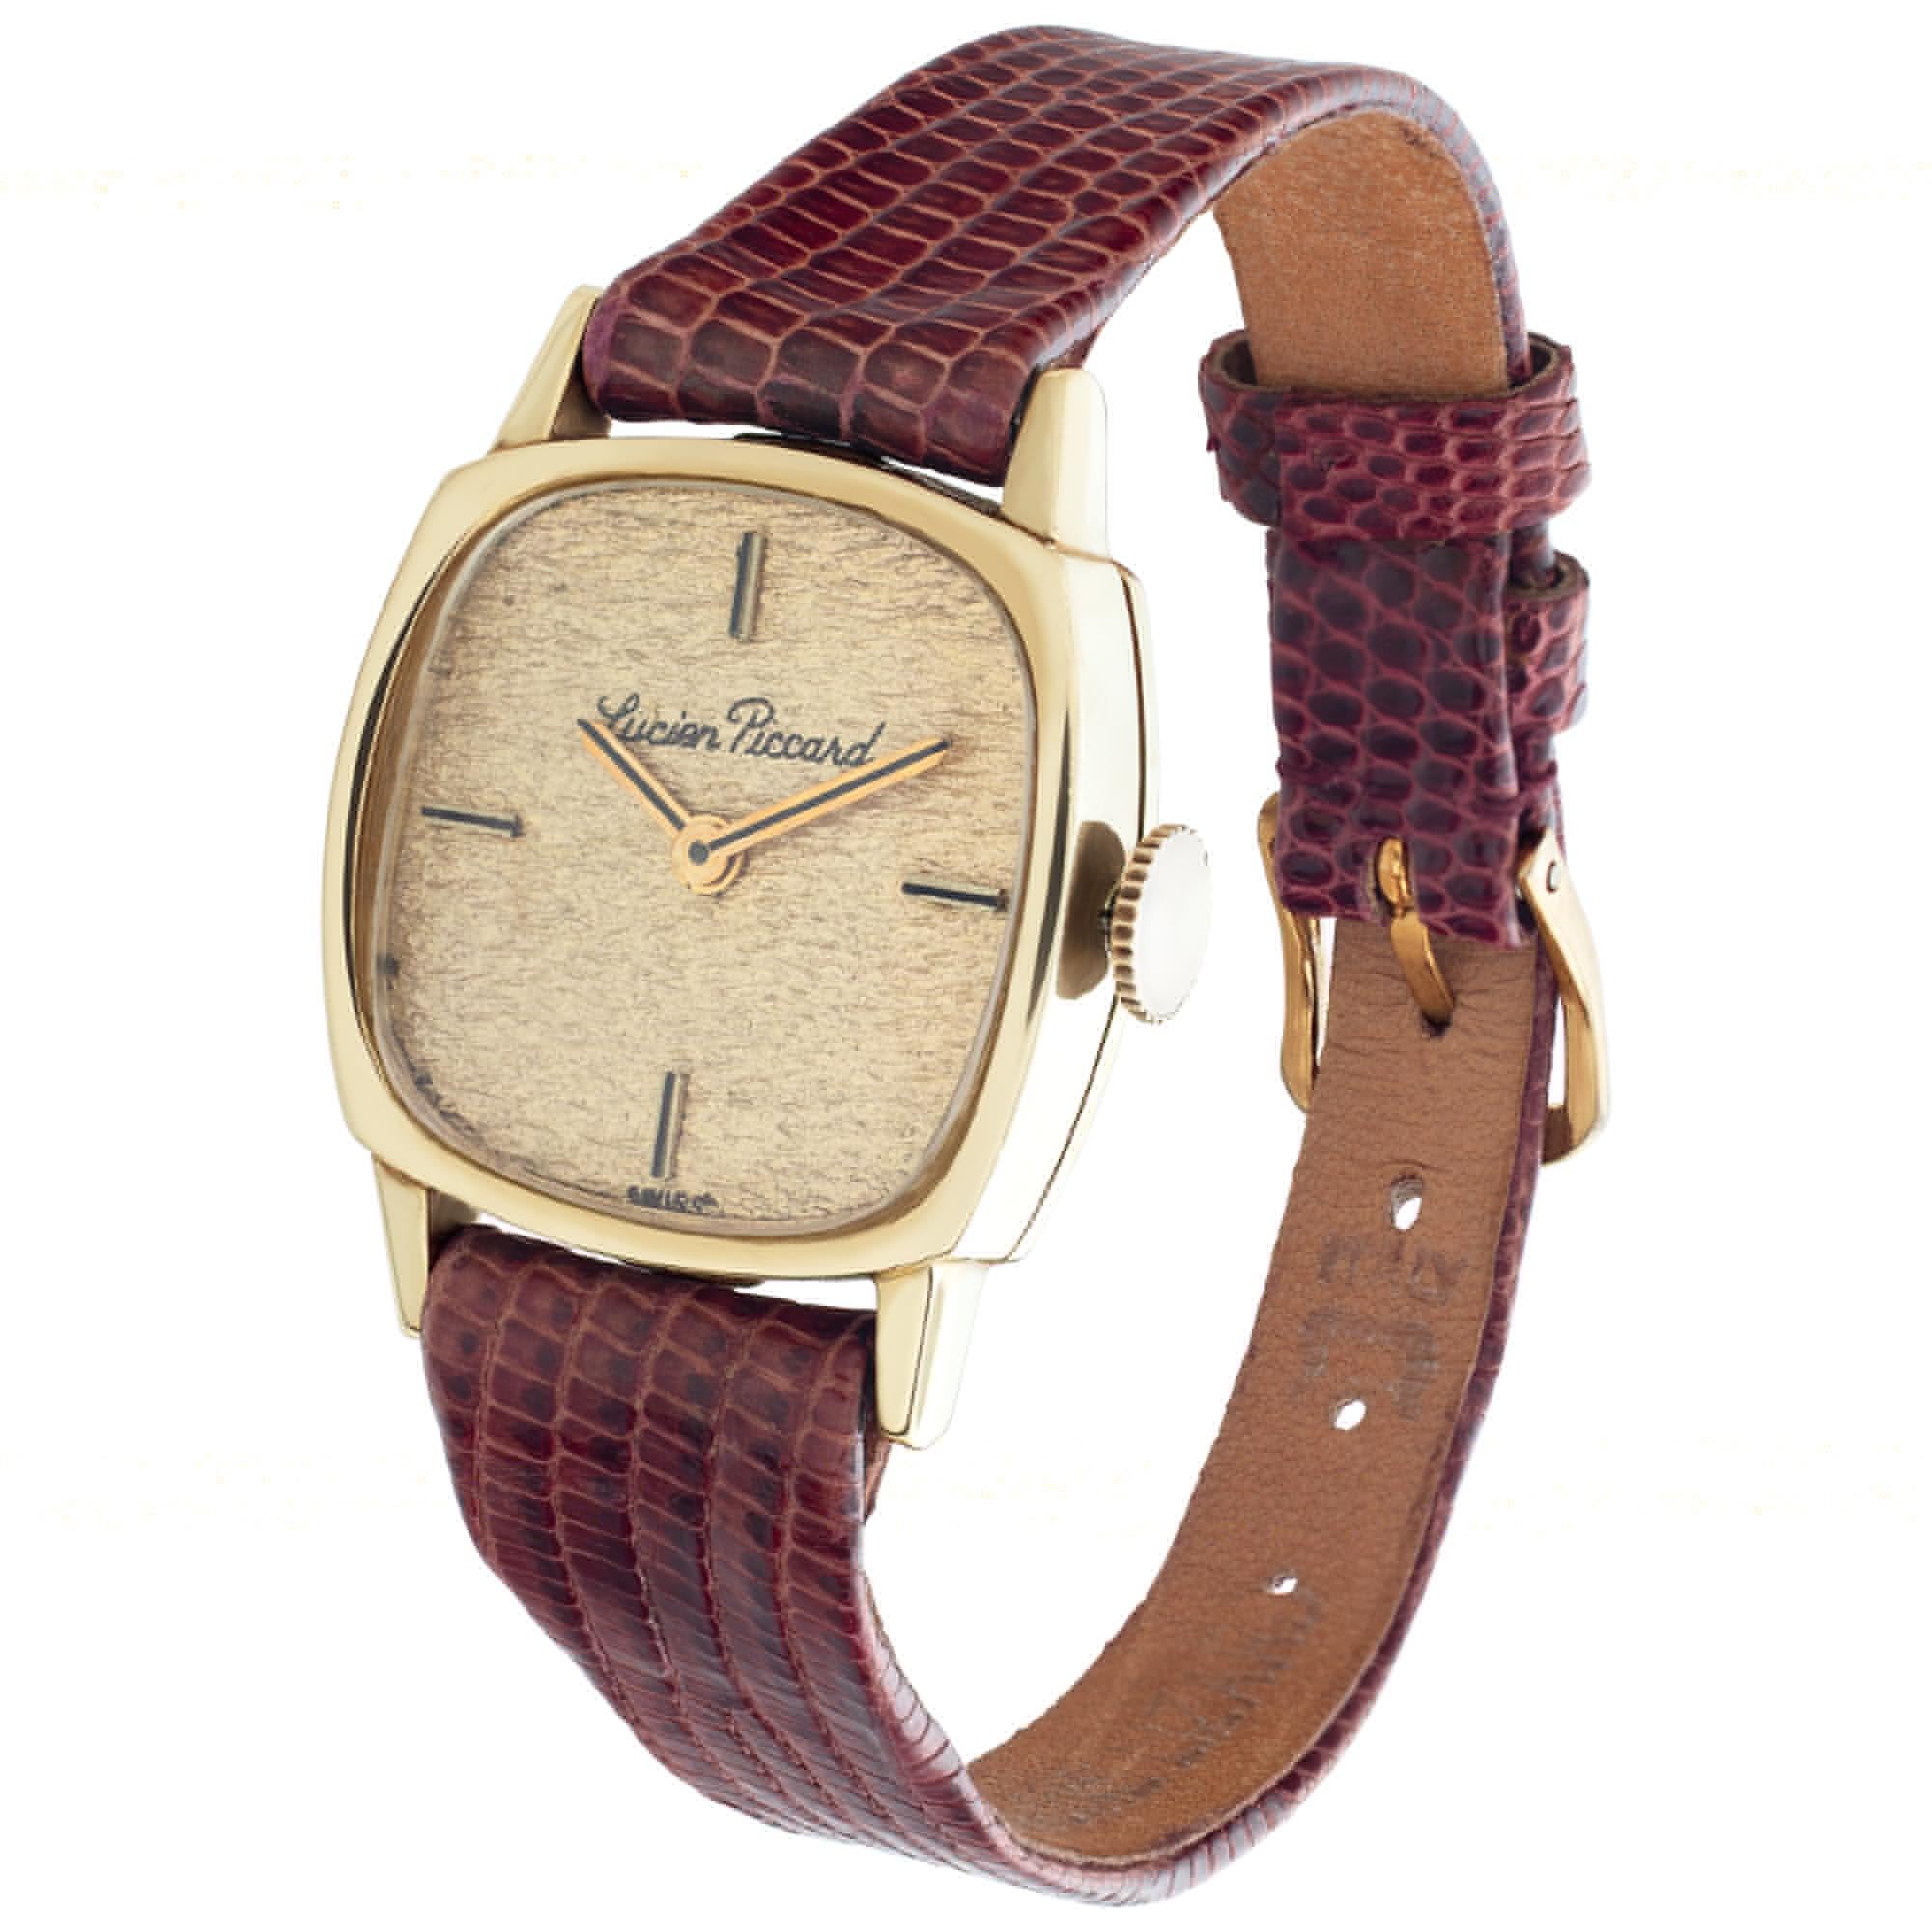 Vintage Lucien Picard in 14k with a gold colored textured bark dial set with applied stick markers on a lizard  band with a gold fill tang buckle. Circa 1930s. Fine Pre-owned Lucien Picard Watch. Certified preowned Vintage Lucien Picard Vintage